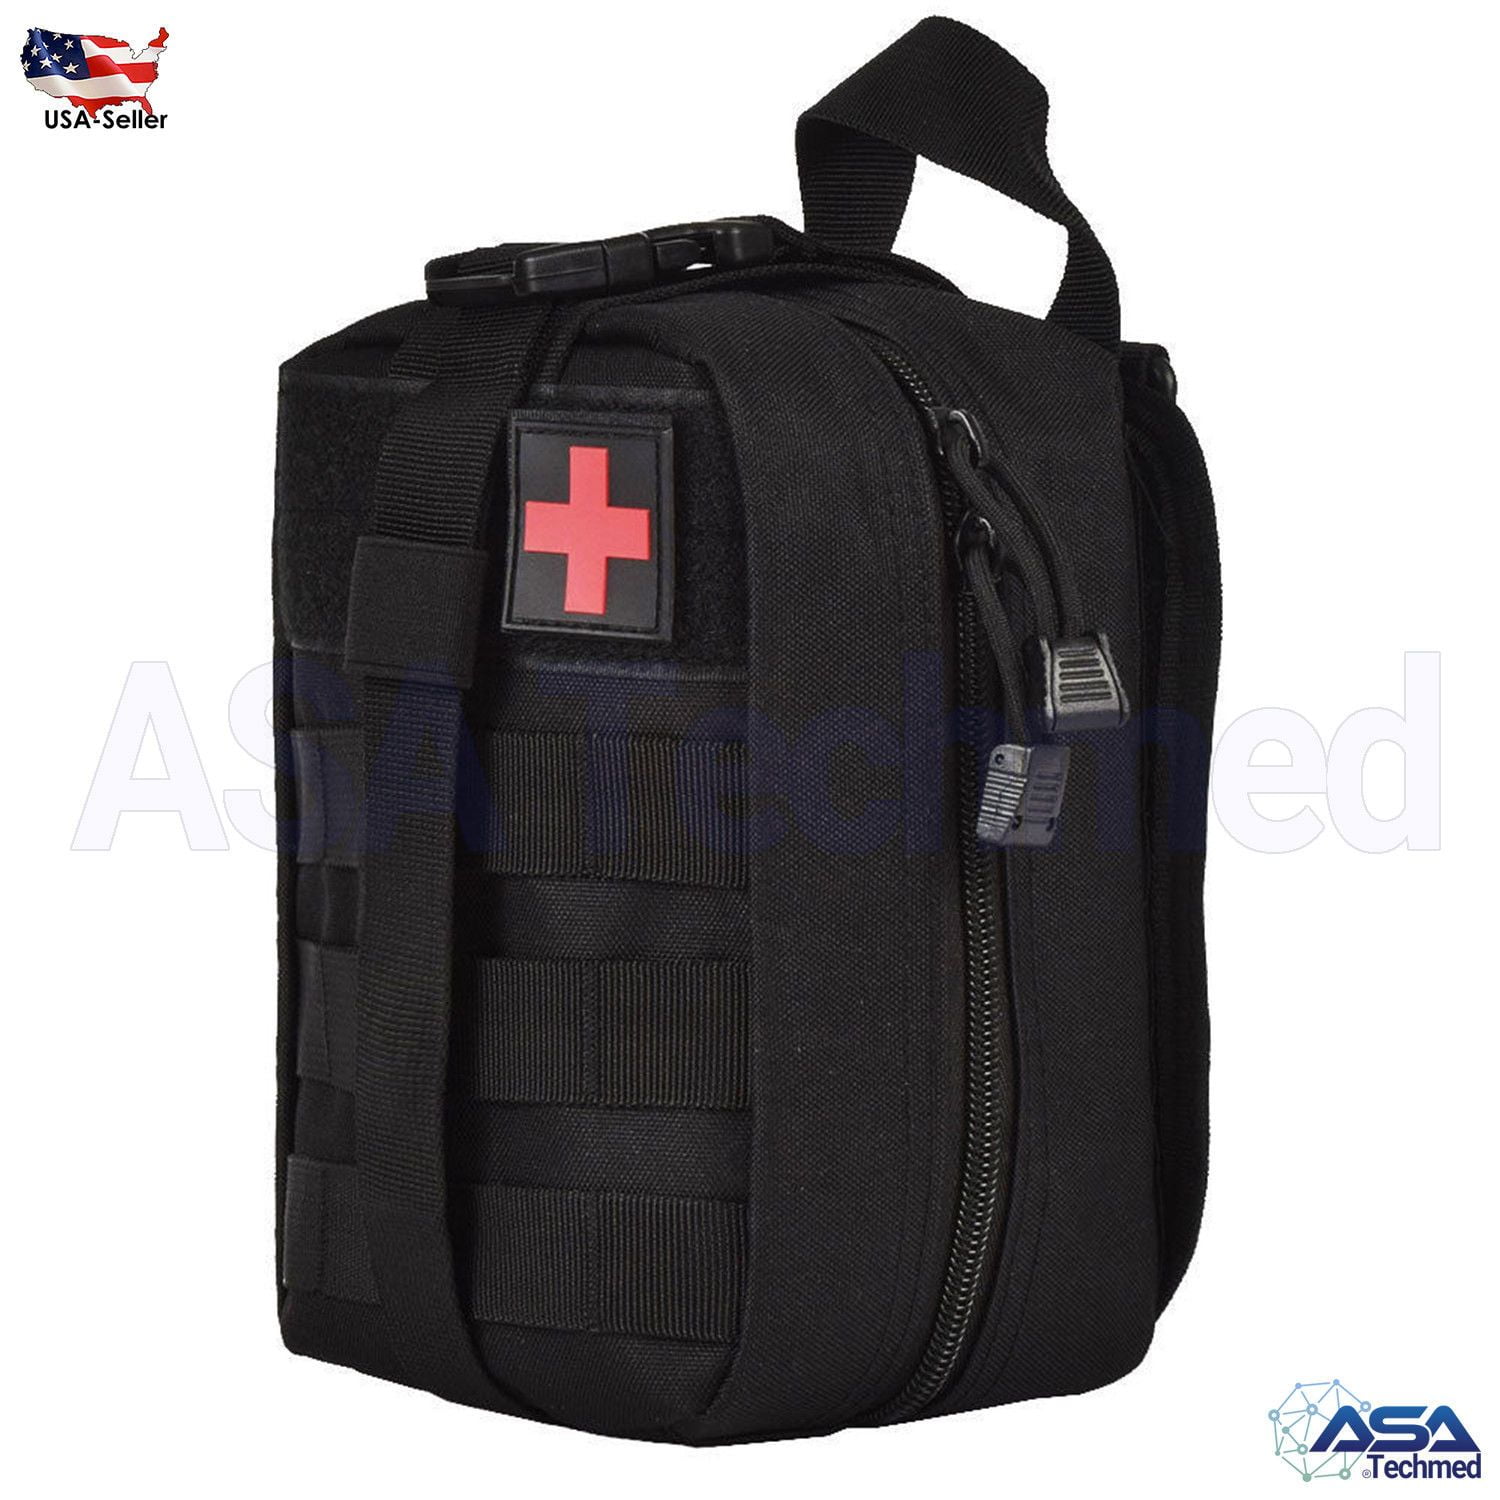 Precision Pro HX Academy Football Medical Kit Bag Only 